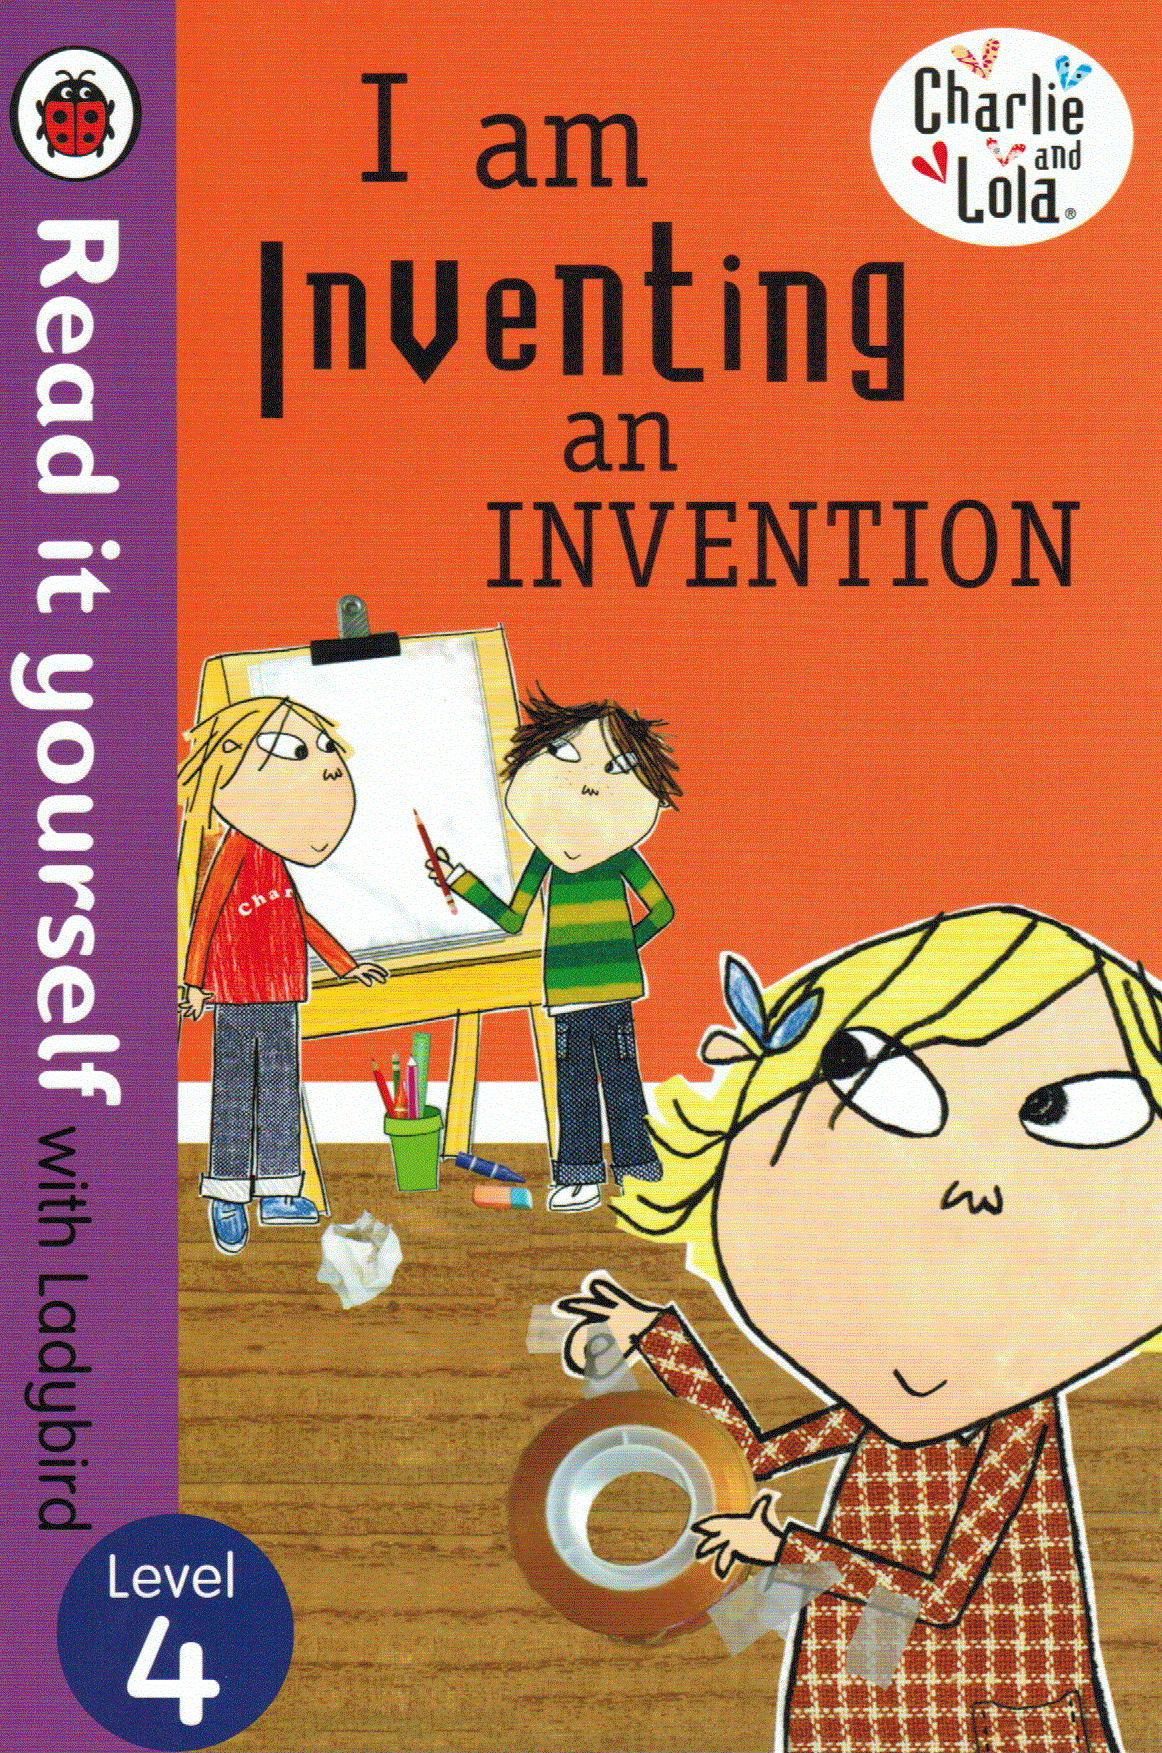 R.I.Y.4 - CHARLIE AND LOLA: I AM INVENTING AN INVENTION